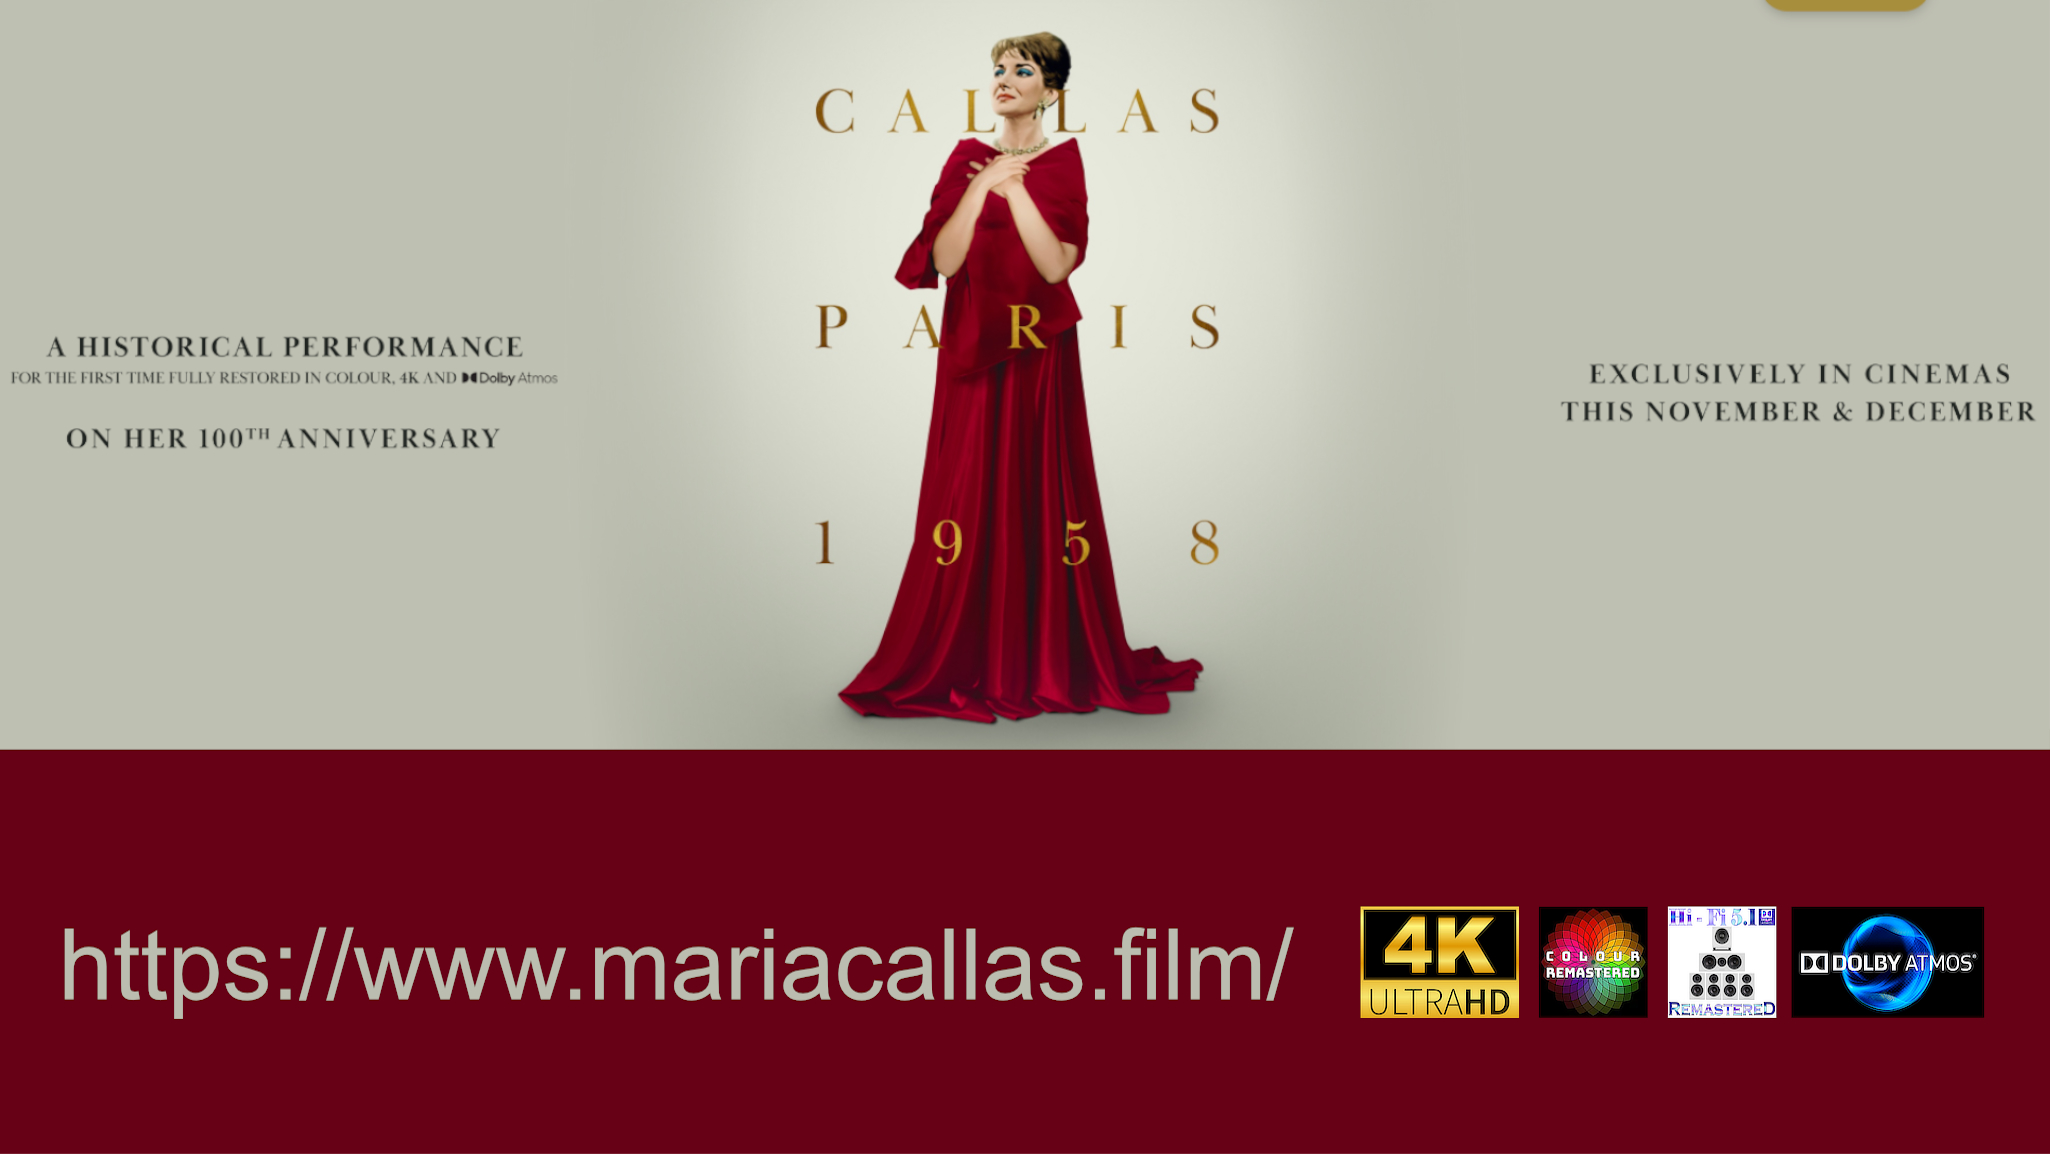 THE ENQUIRER • Callas: Paris 1958 Concert in 4K Dolby-Atmos